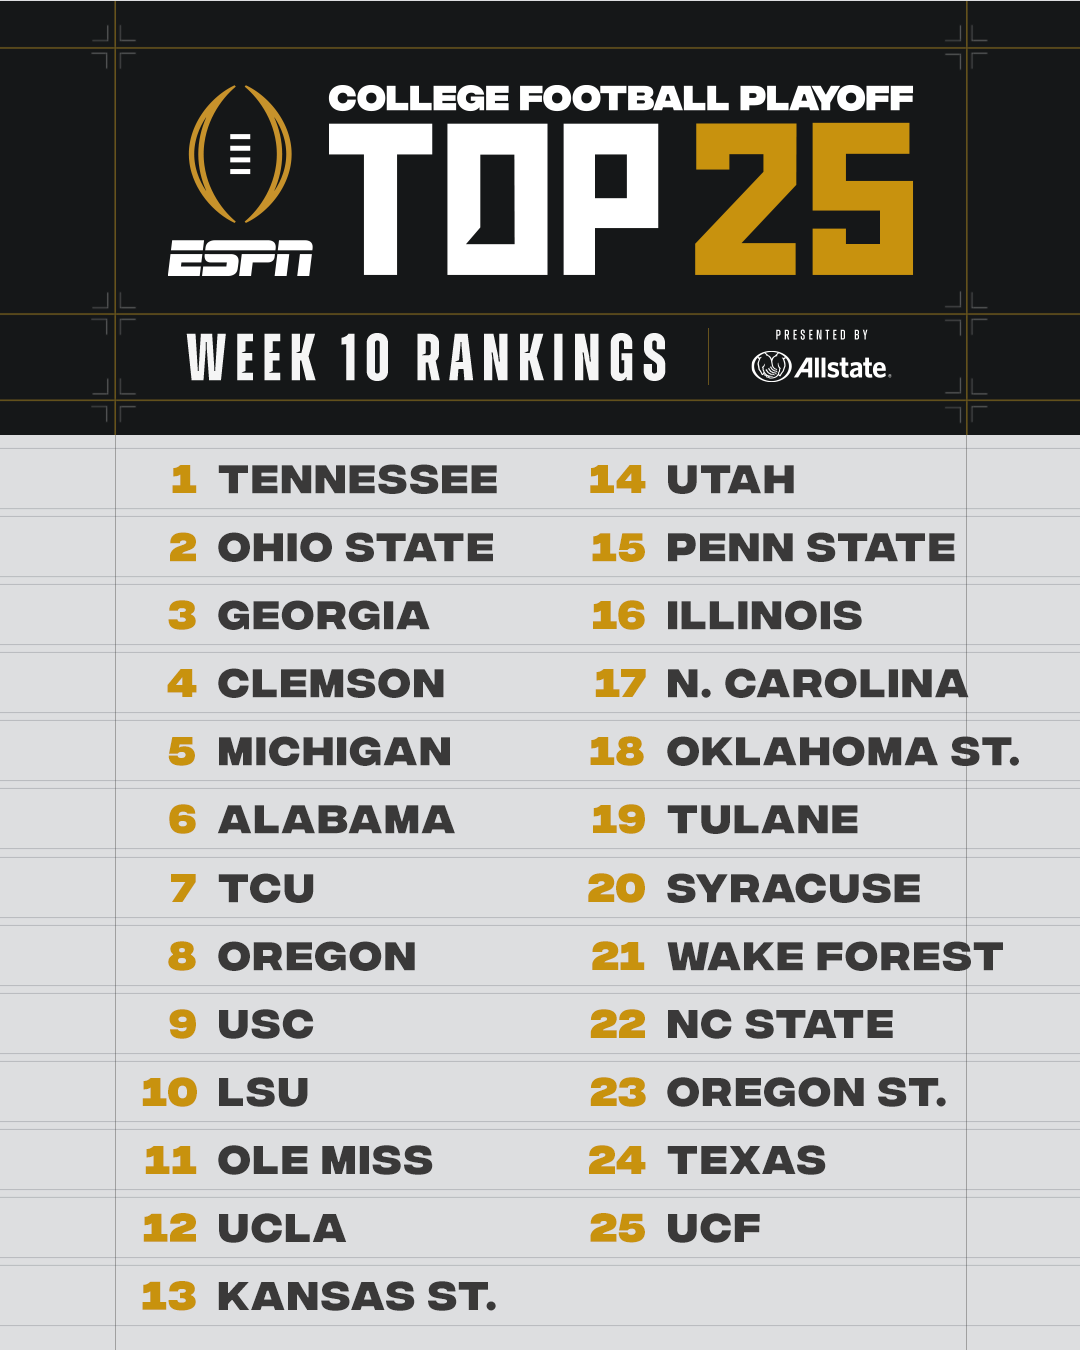 ESPN College Football on Twitter "THE TOP 25 CFP RANKINGS HAVE ARRIVED